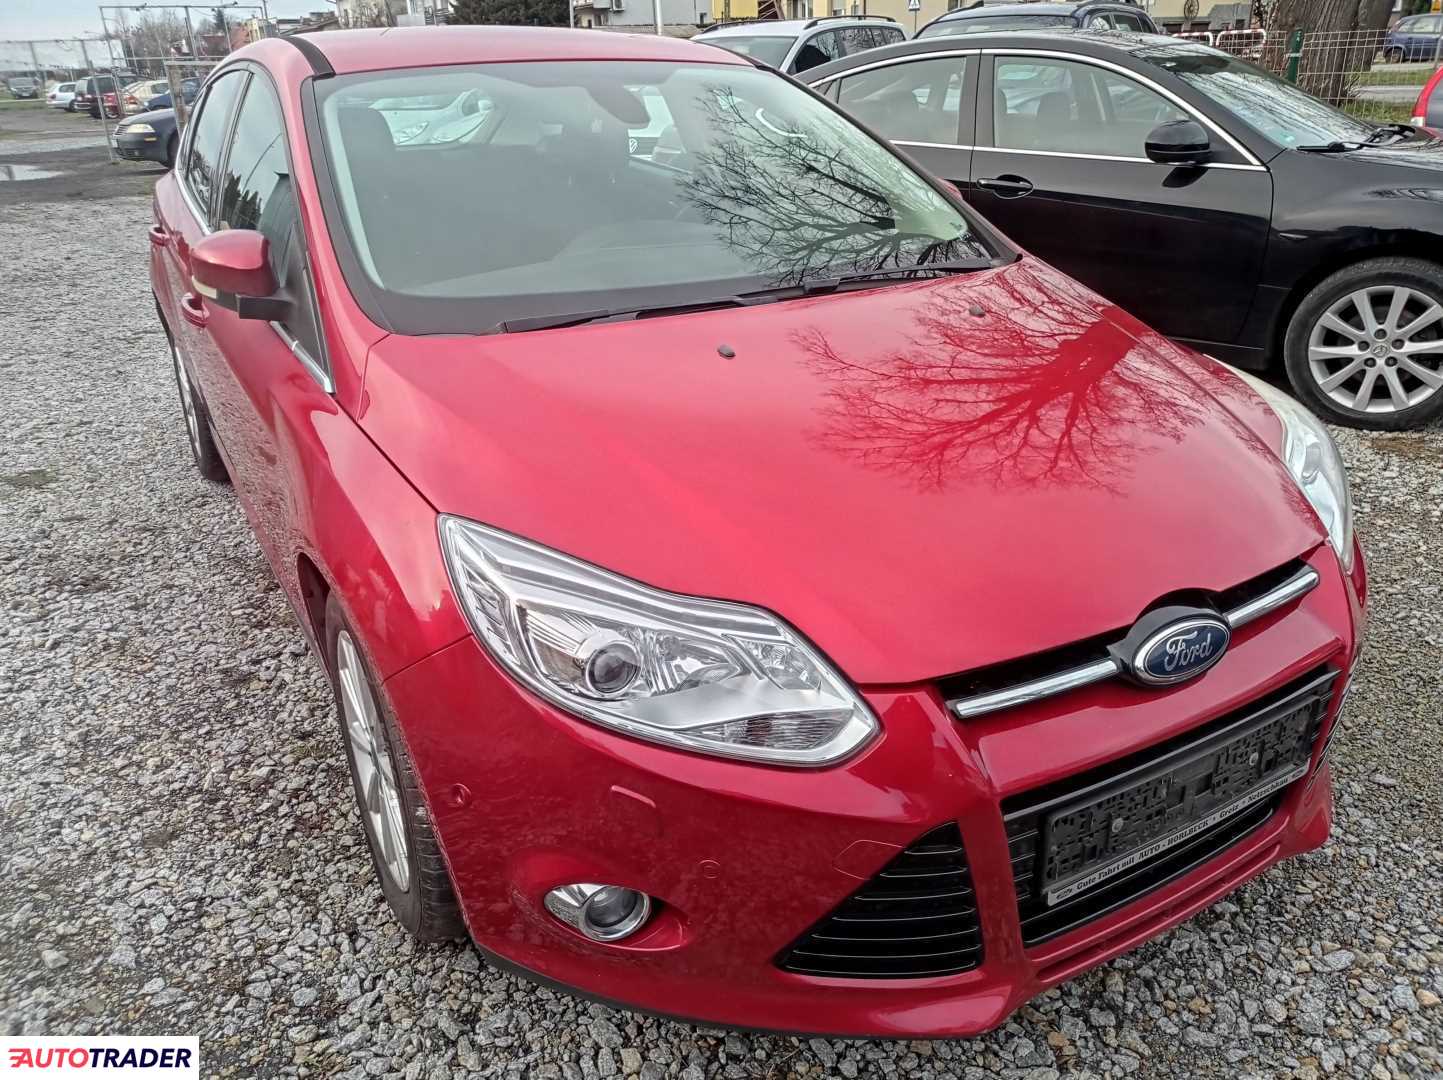 Ford Focus 2012 0.2 180 KM